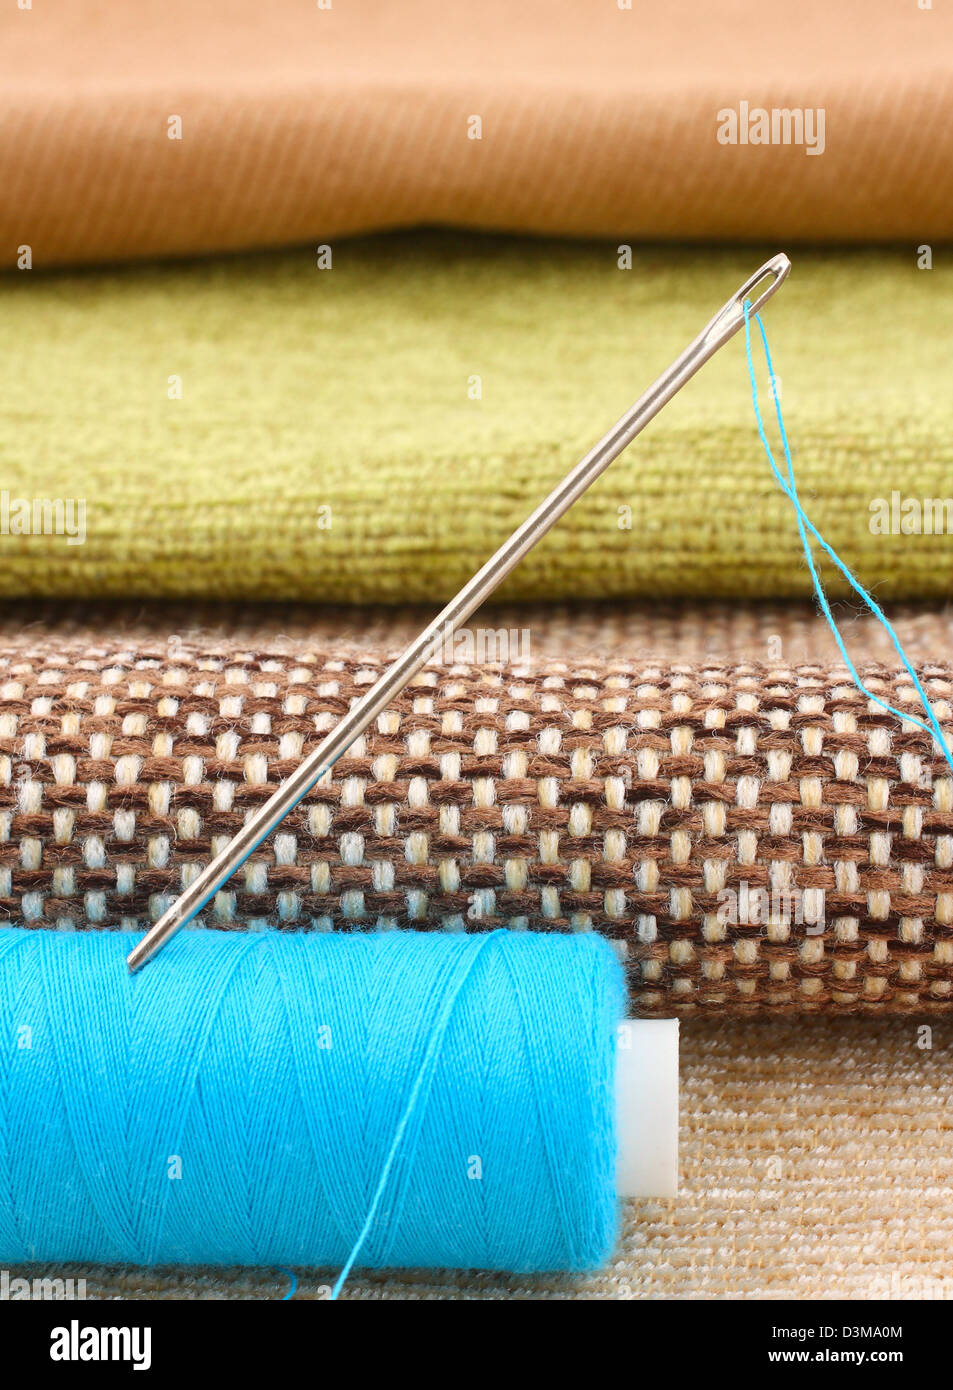 spool of thread with needle on fabric background Stock Photo